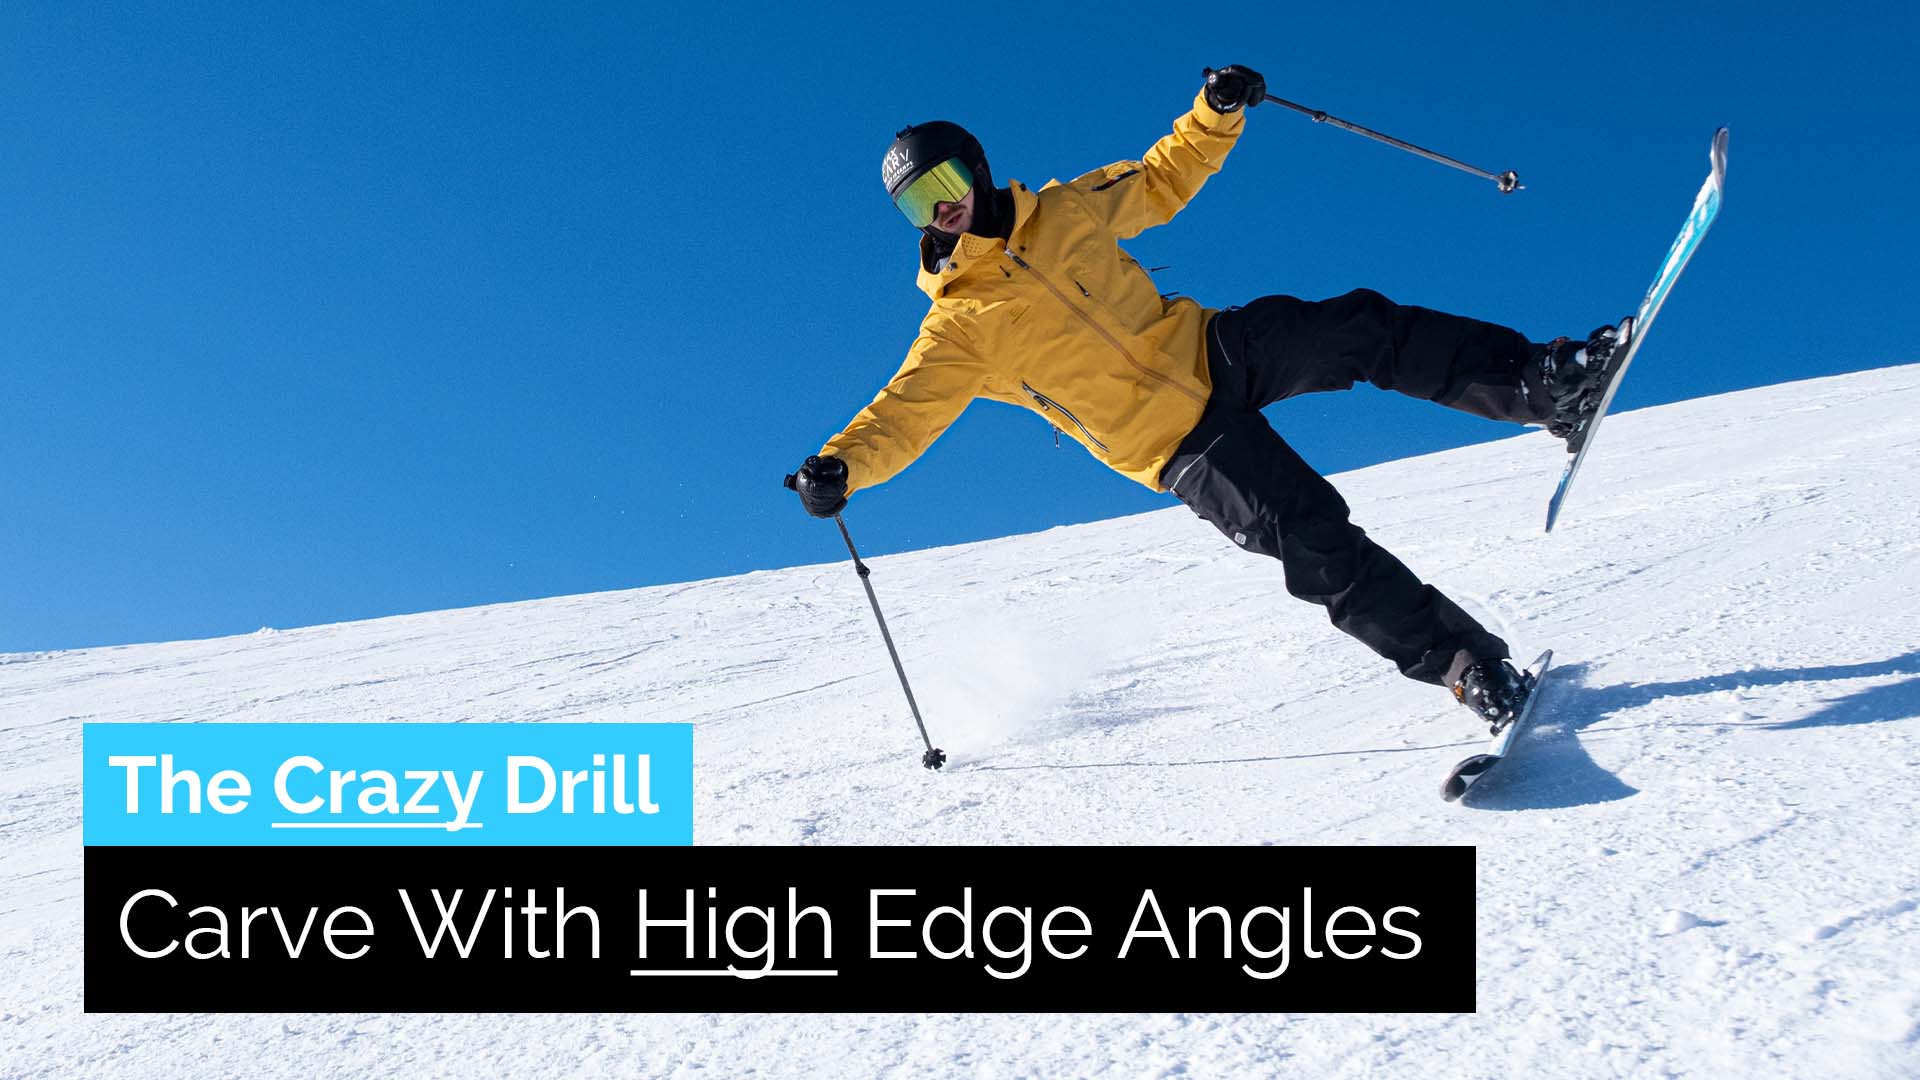 A Crazy Ski Drill to Carve With High Edge Angles | Drill Bits